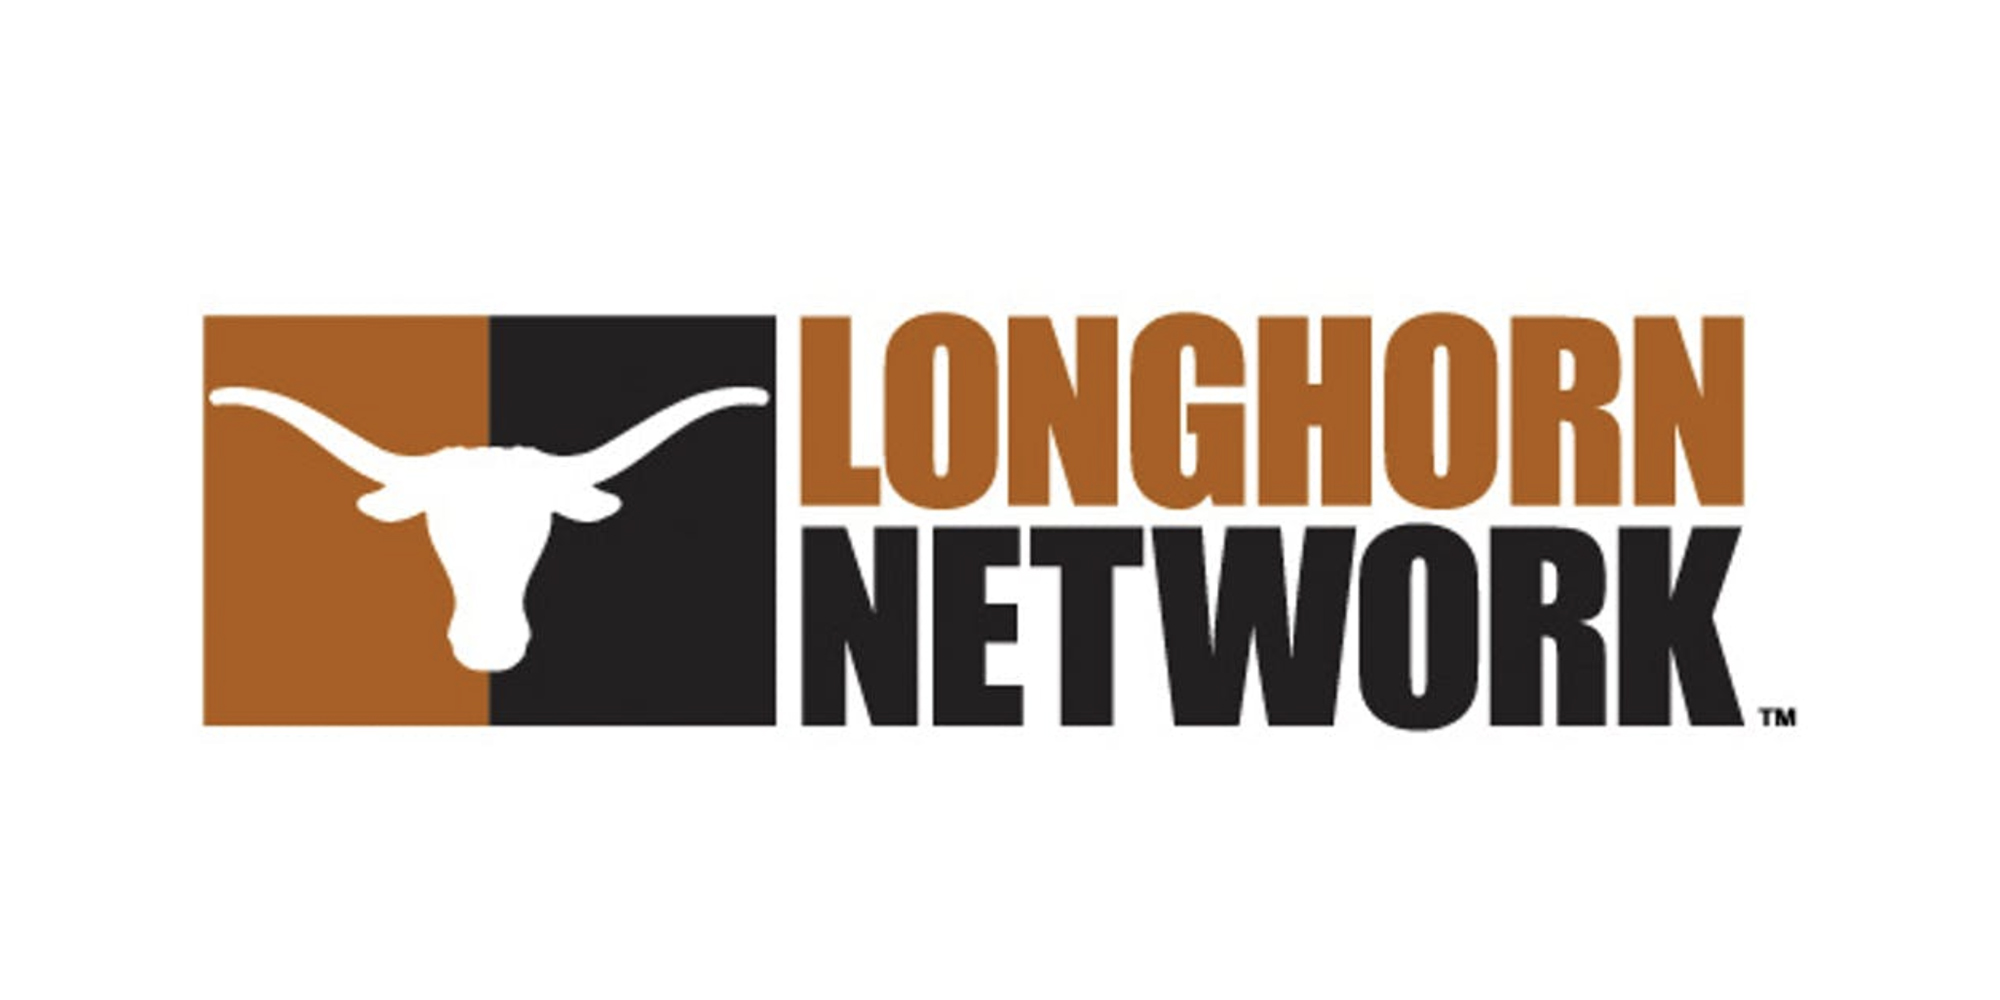 How to Stream Longhorn Network Watch Texas Sports Live